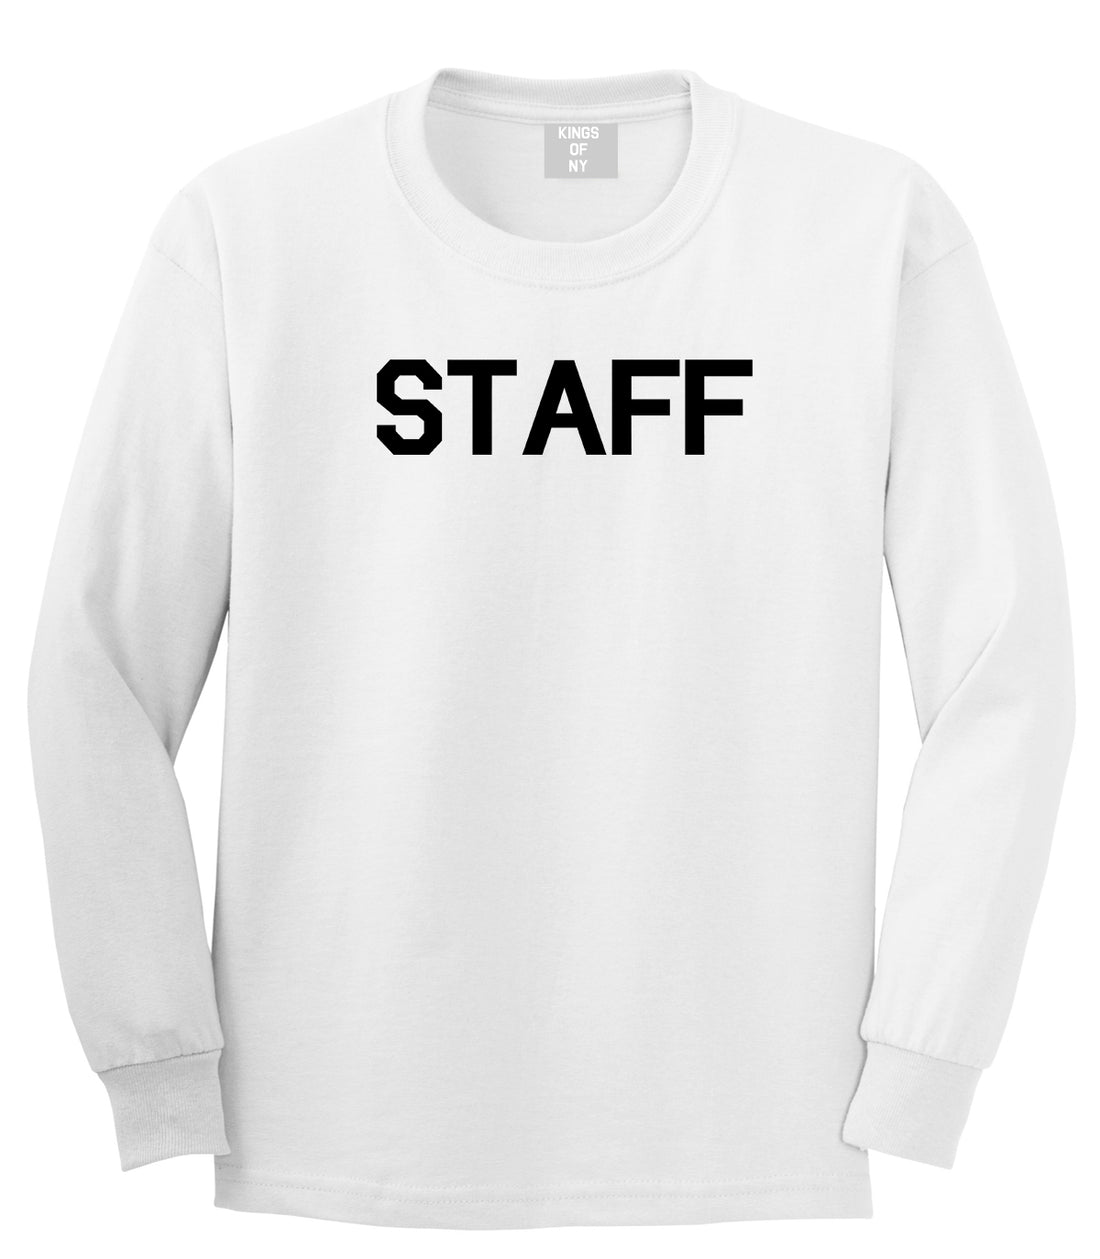 Staff Club Concert Event Mens White Long Sleeve T-Shirt by KINGS OF NY